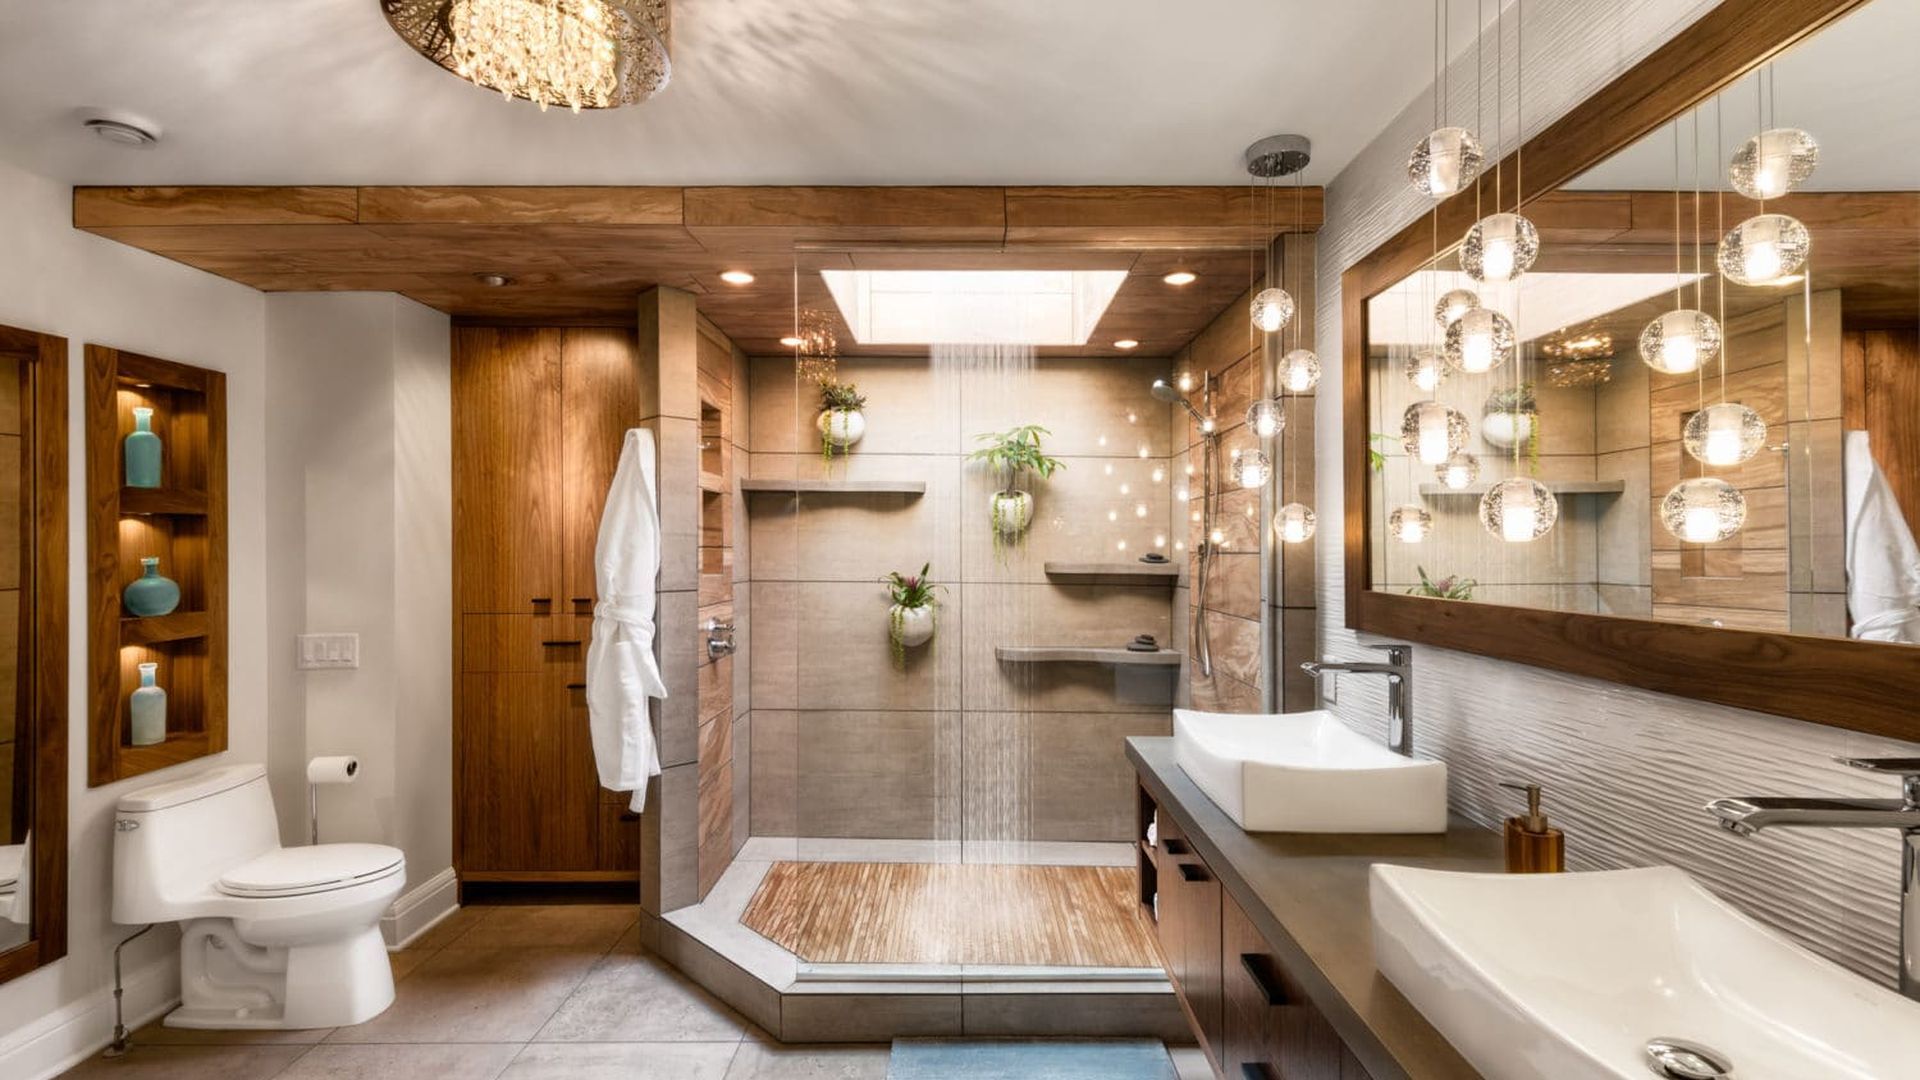 A photo shows a bathroom with lighting in small hanging balls, a chandelier, two sinks, a see-through shower with three plants hanging inside on the wall and a toilet to the left